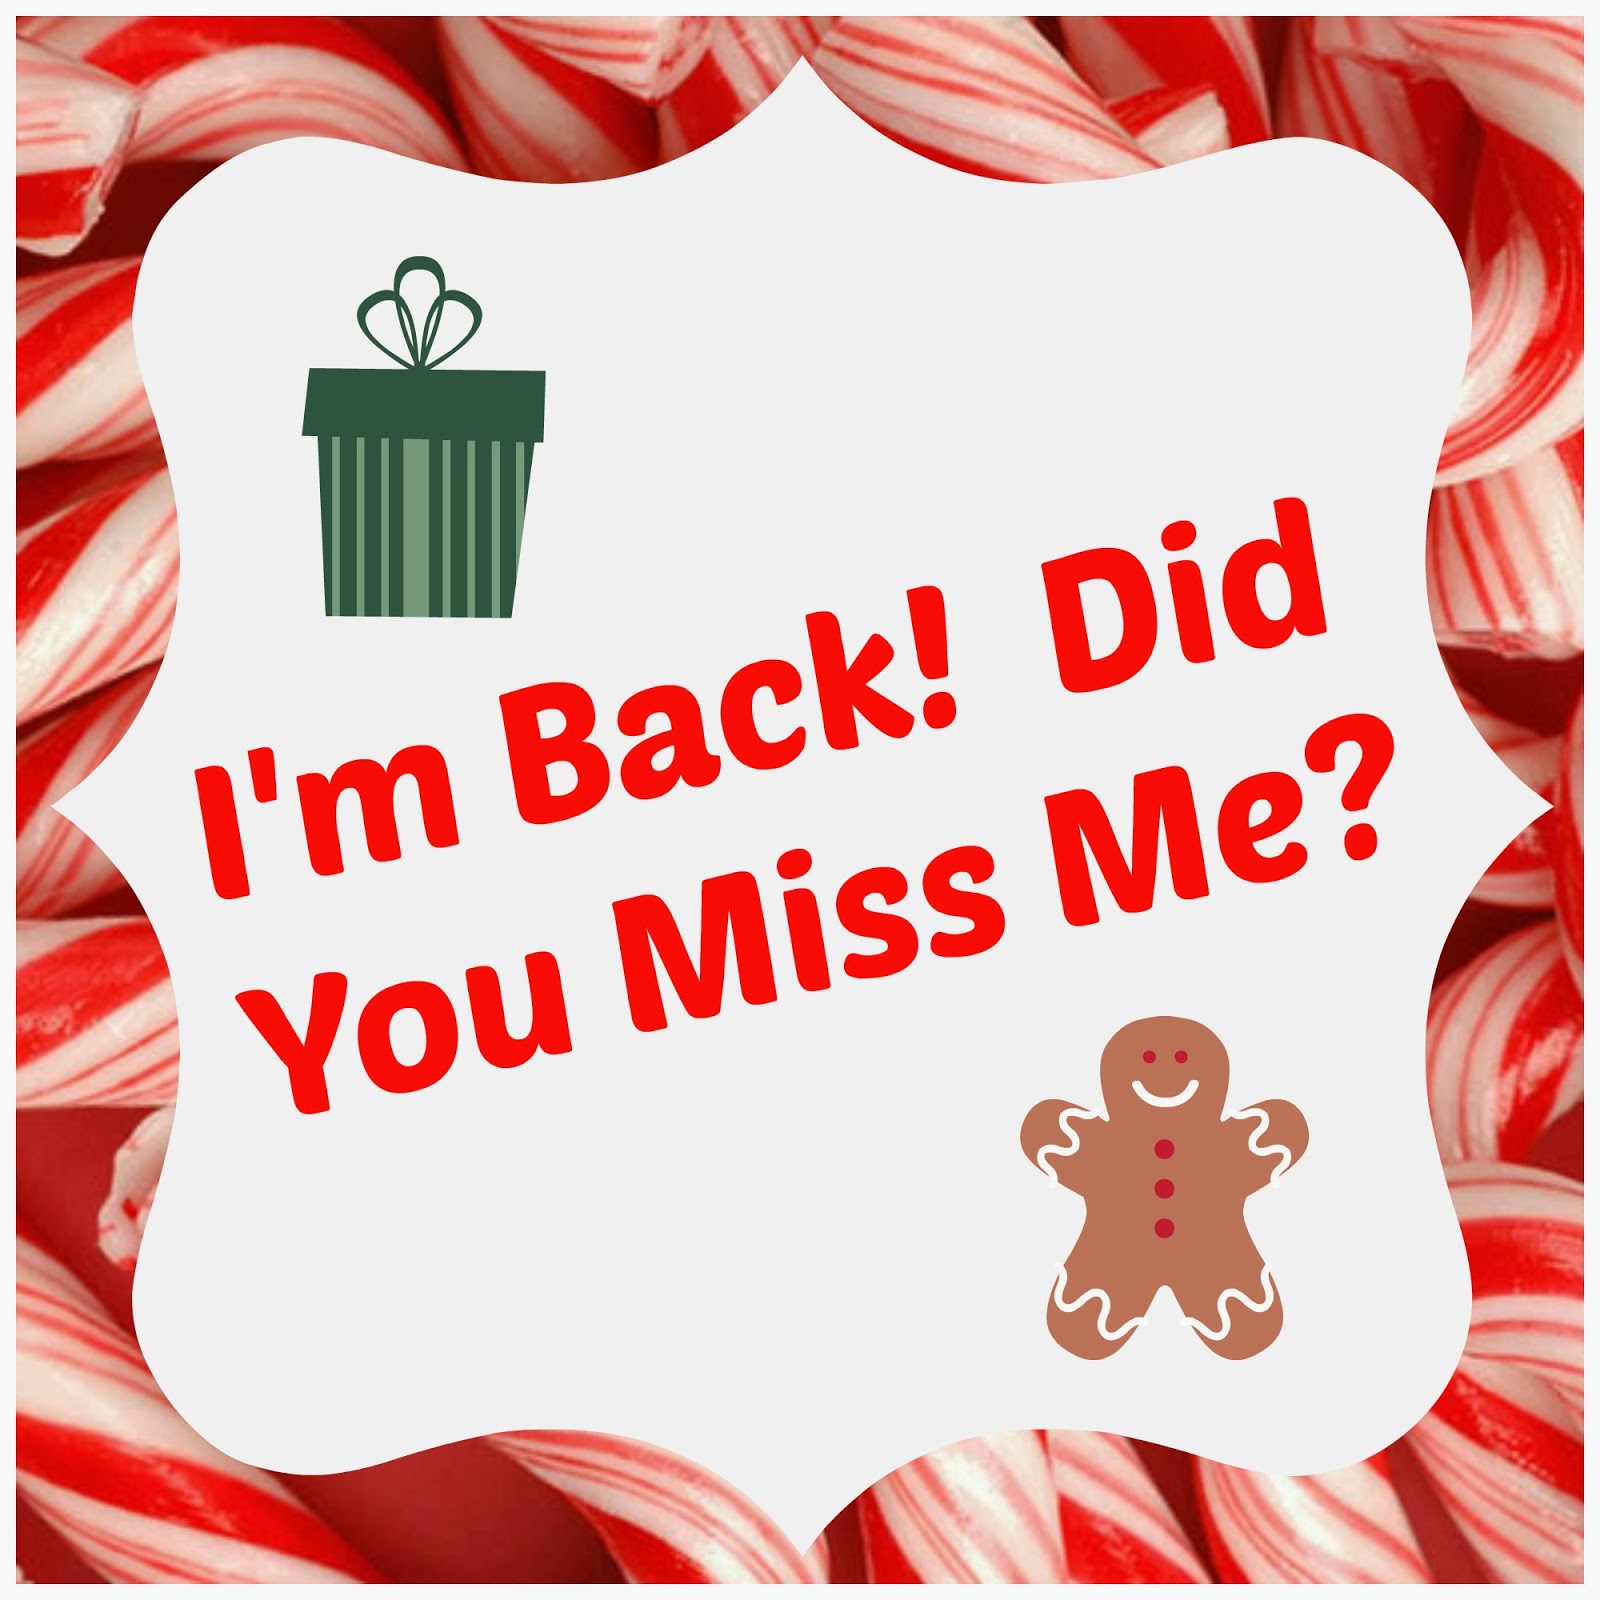 Greatly Blessed: I'm Back, Did You Miss Me?